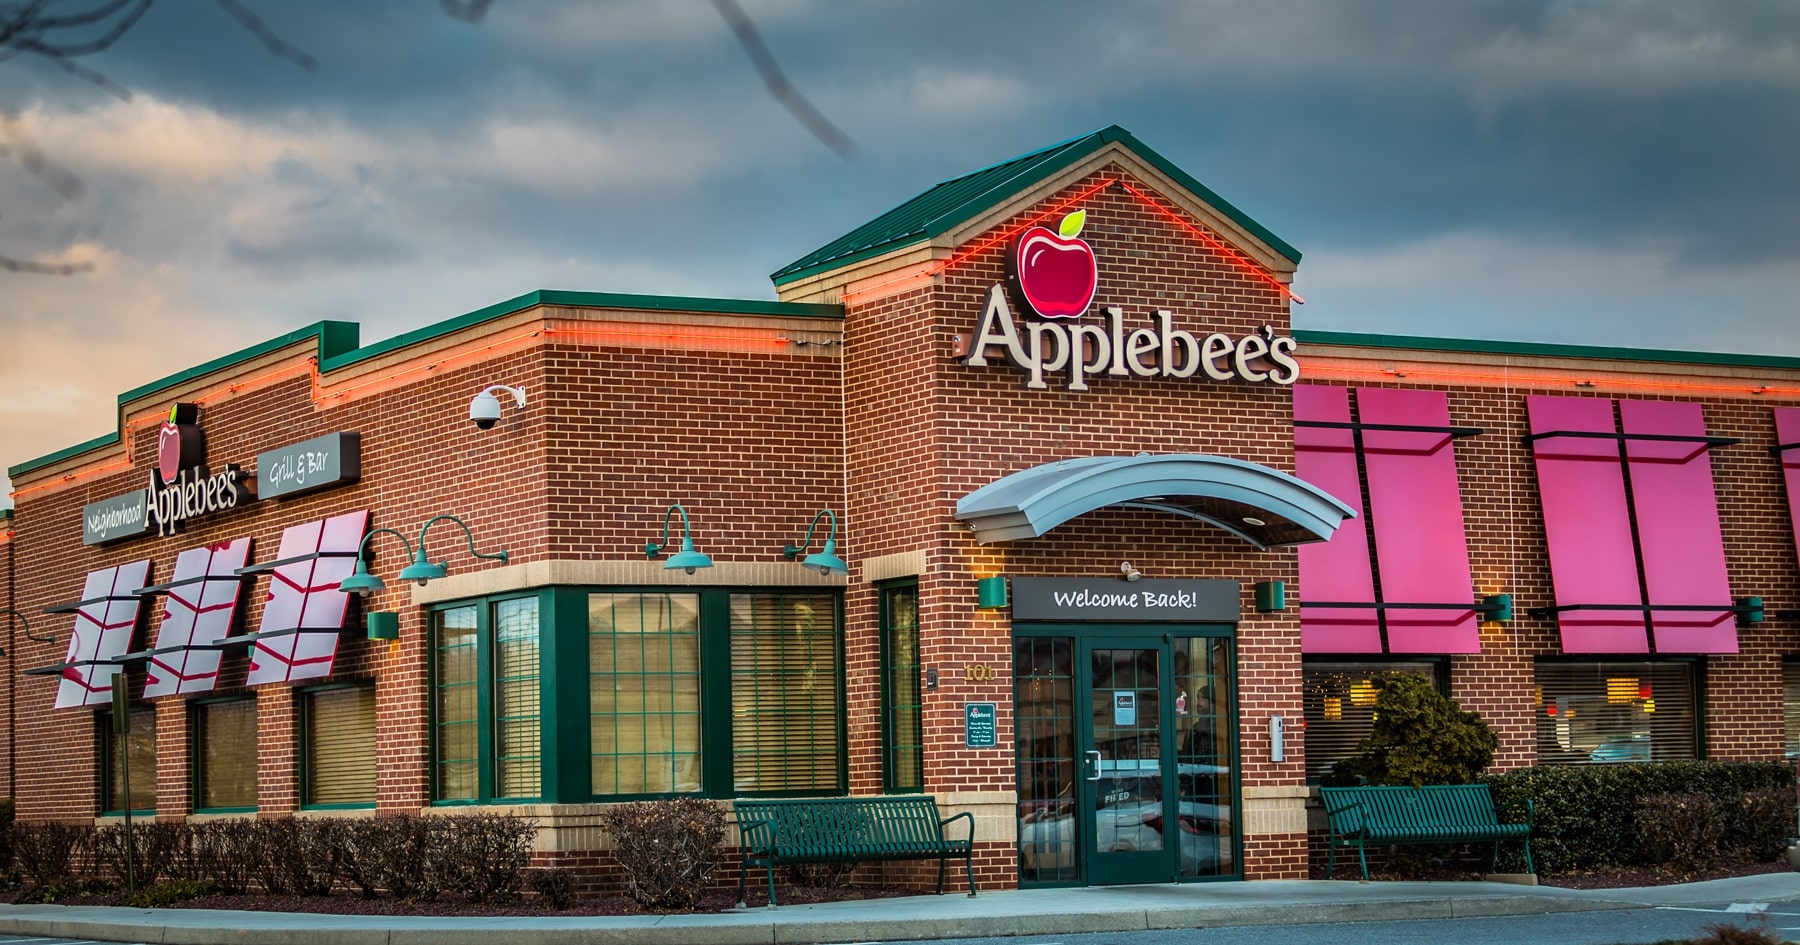 Applebees menu prices featuring 87 items ranging from $1.00 to $49.99